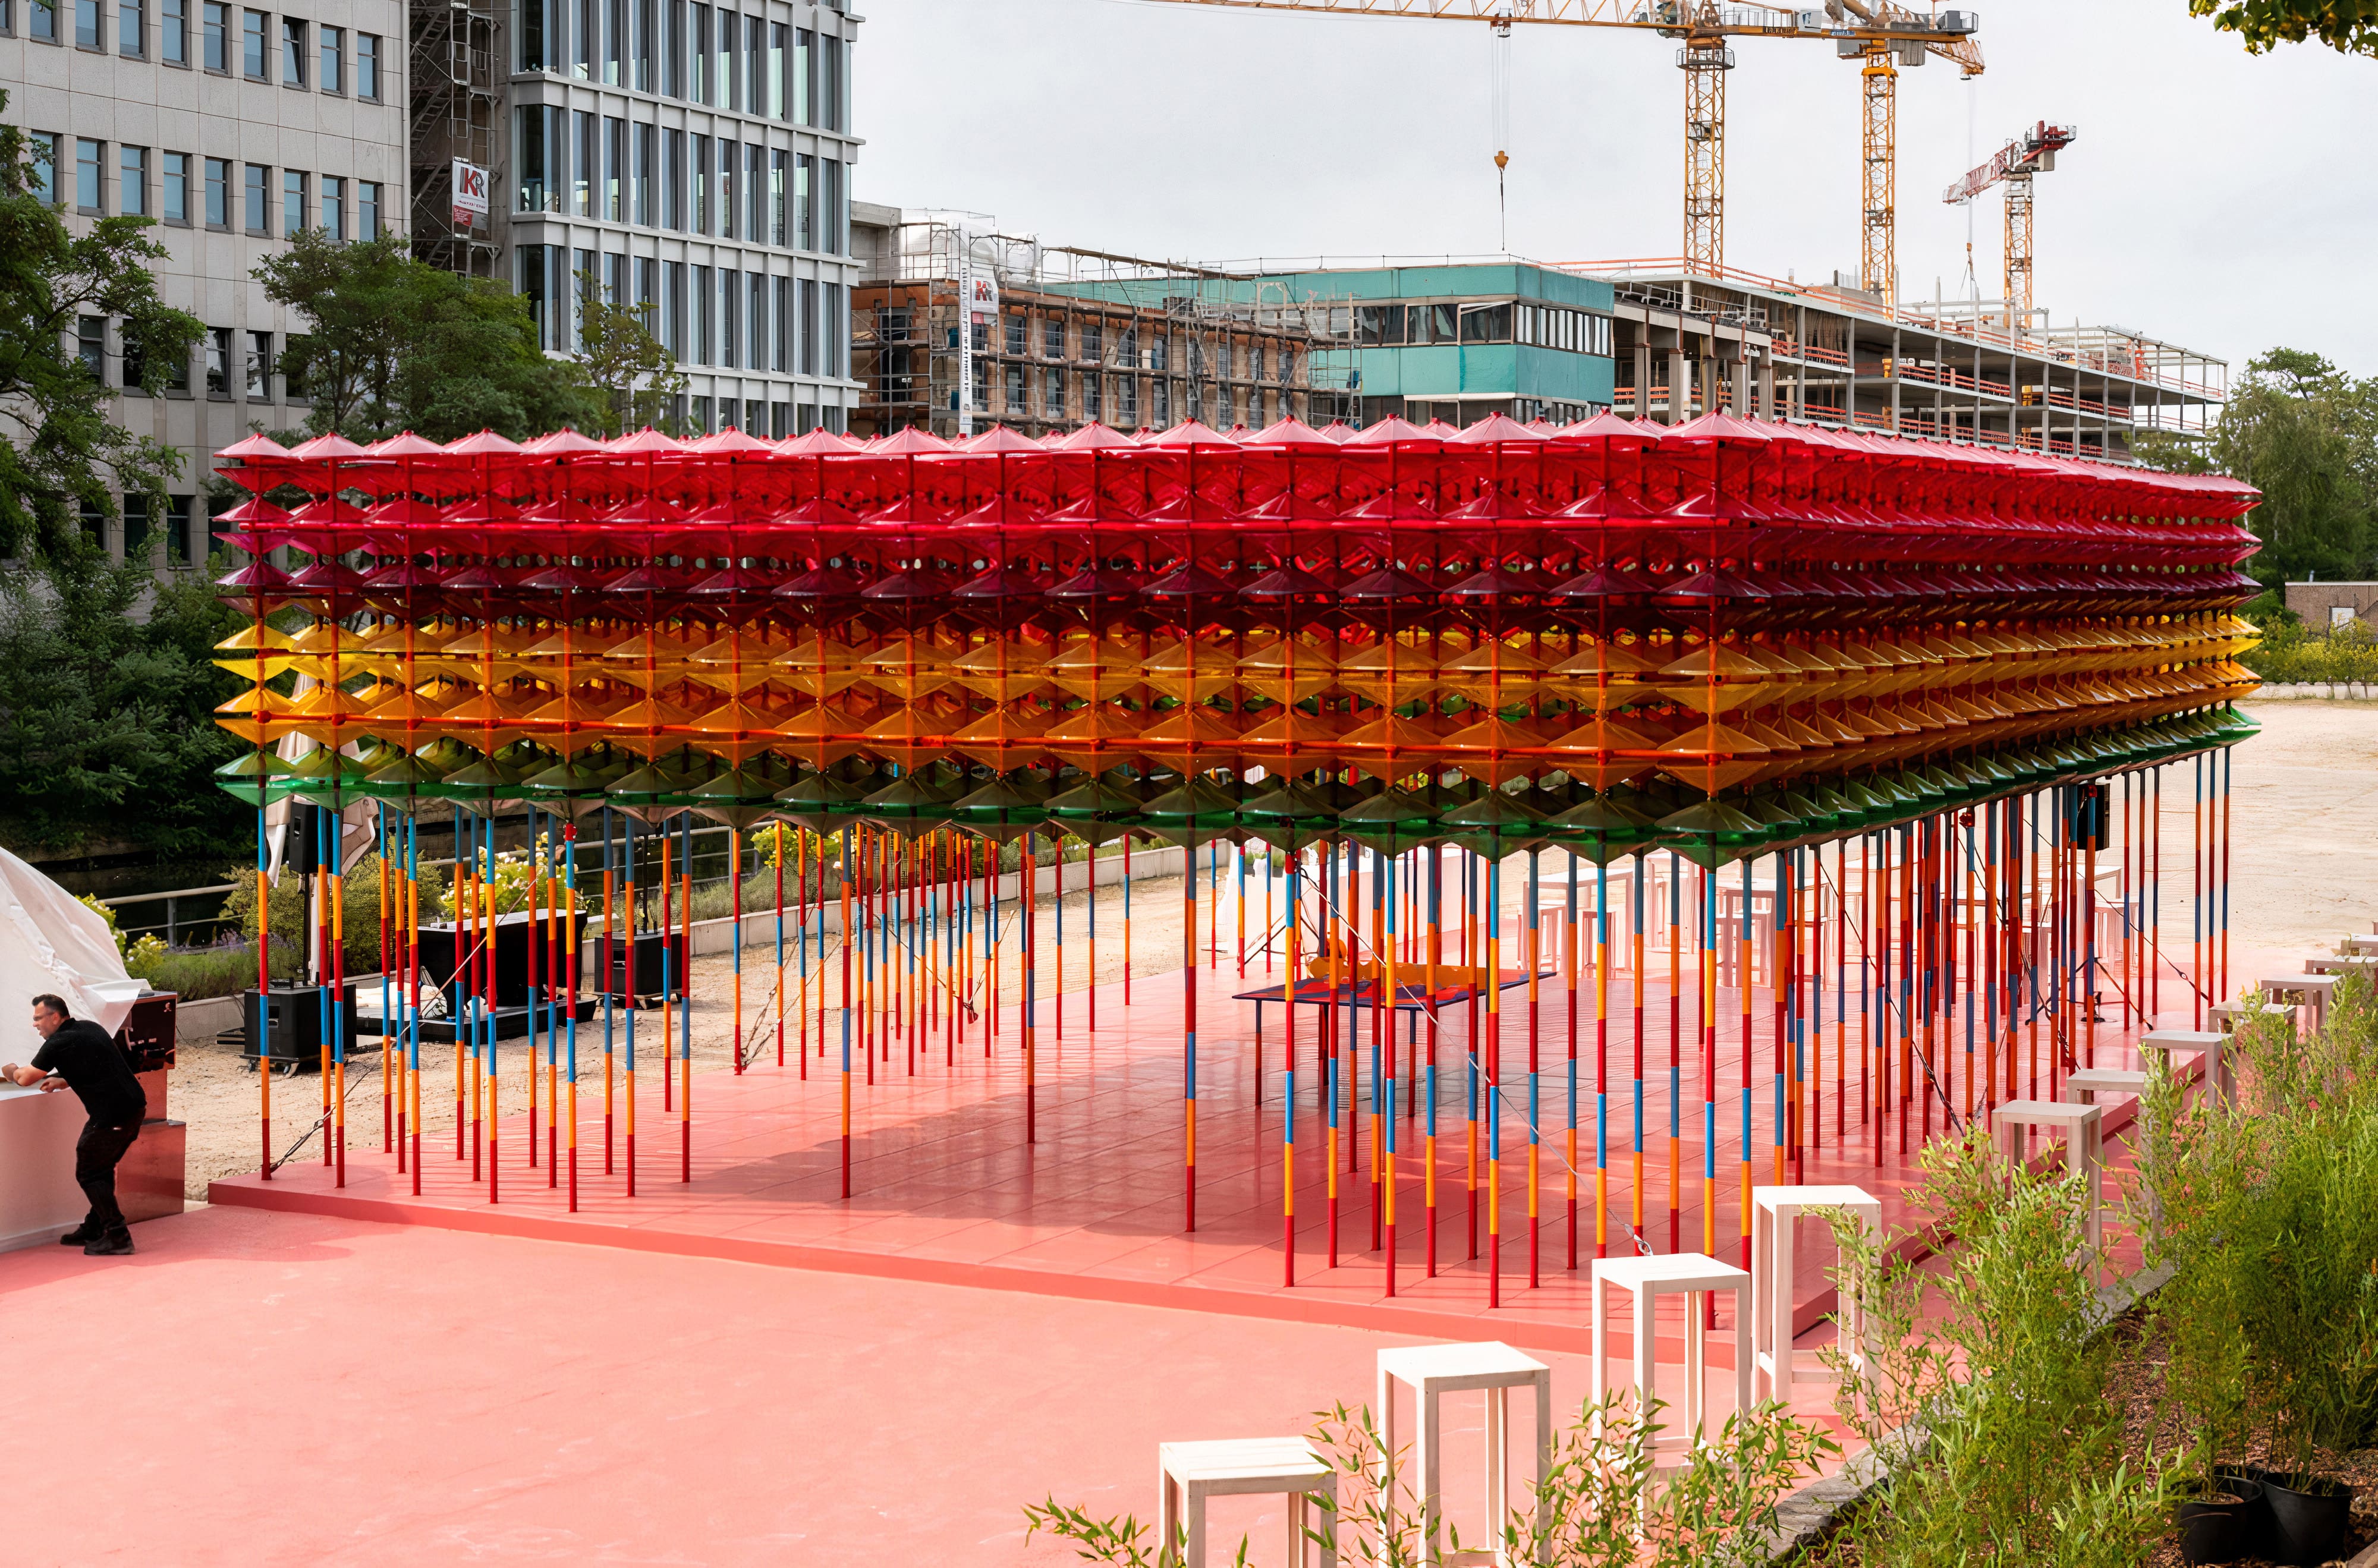 Filtered Rays: A Colorful-Transparent Pavilion by Yinka Ilori Open to Public Activities